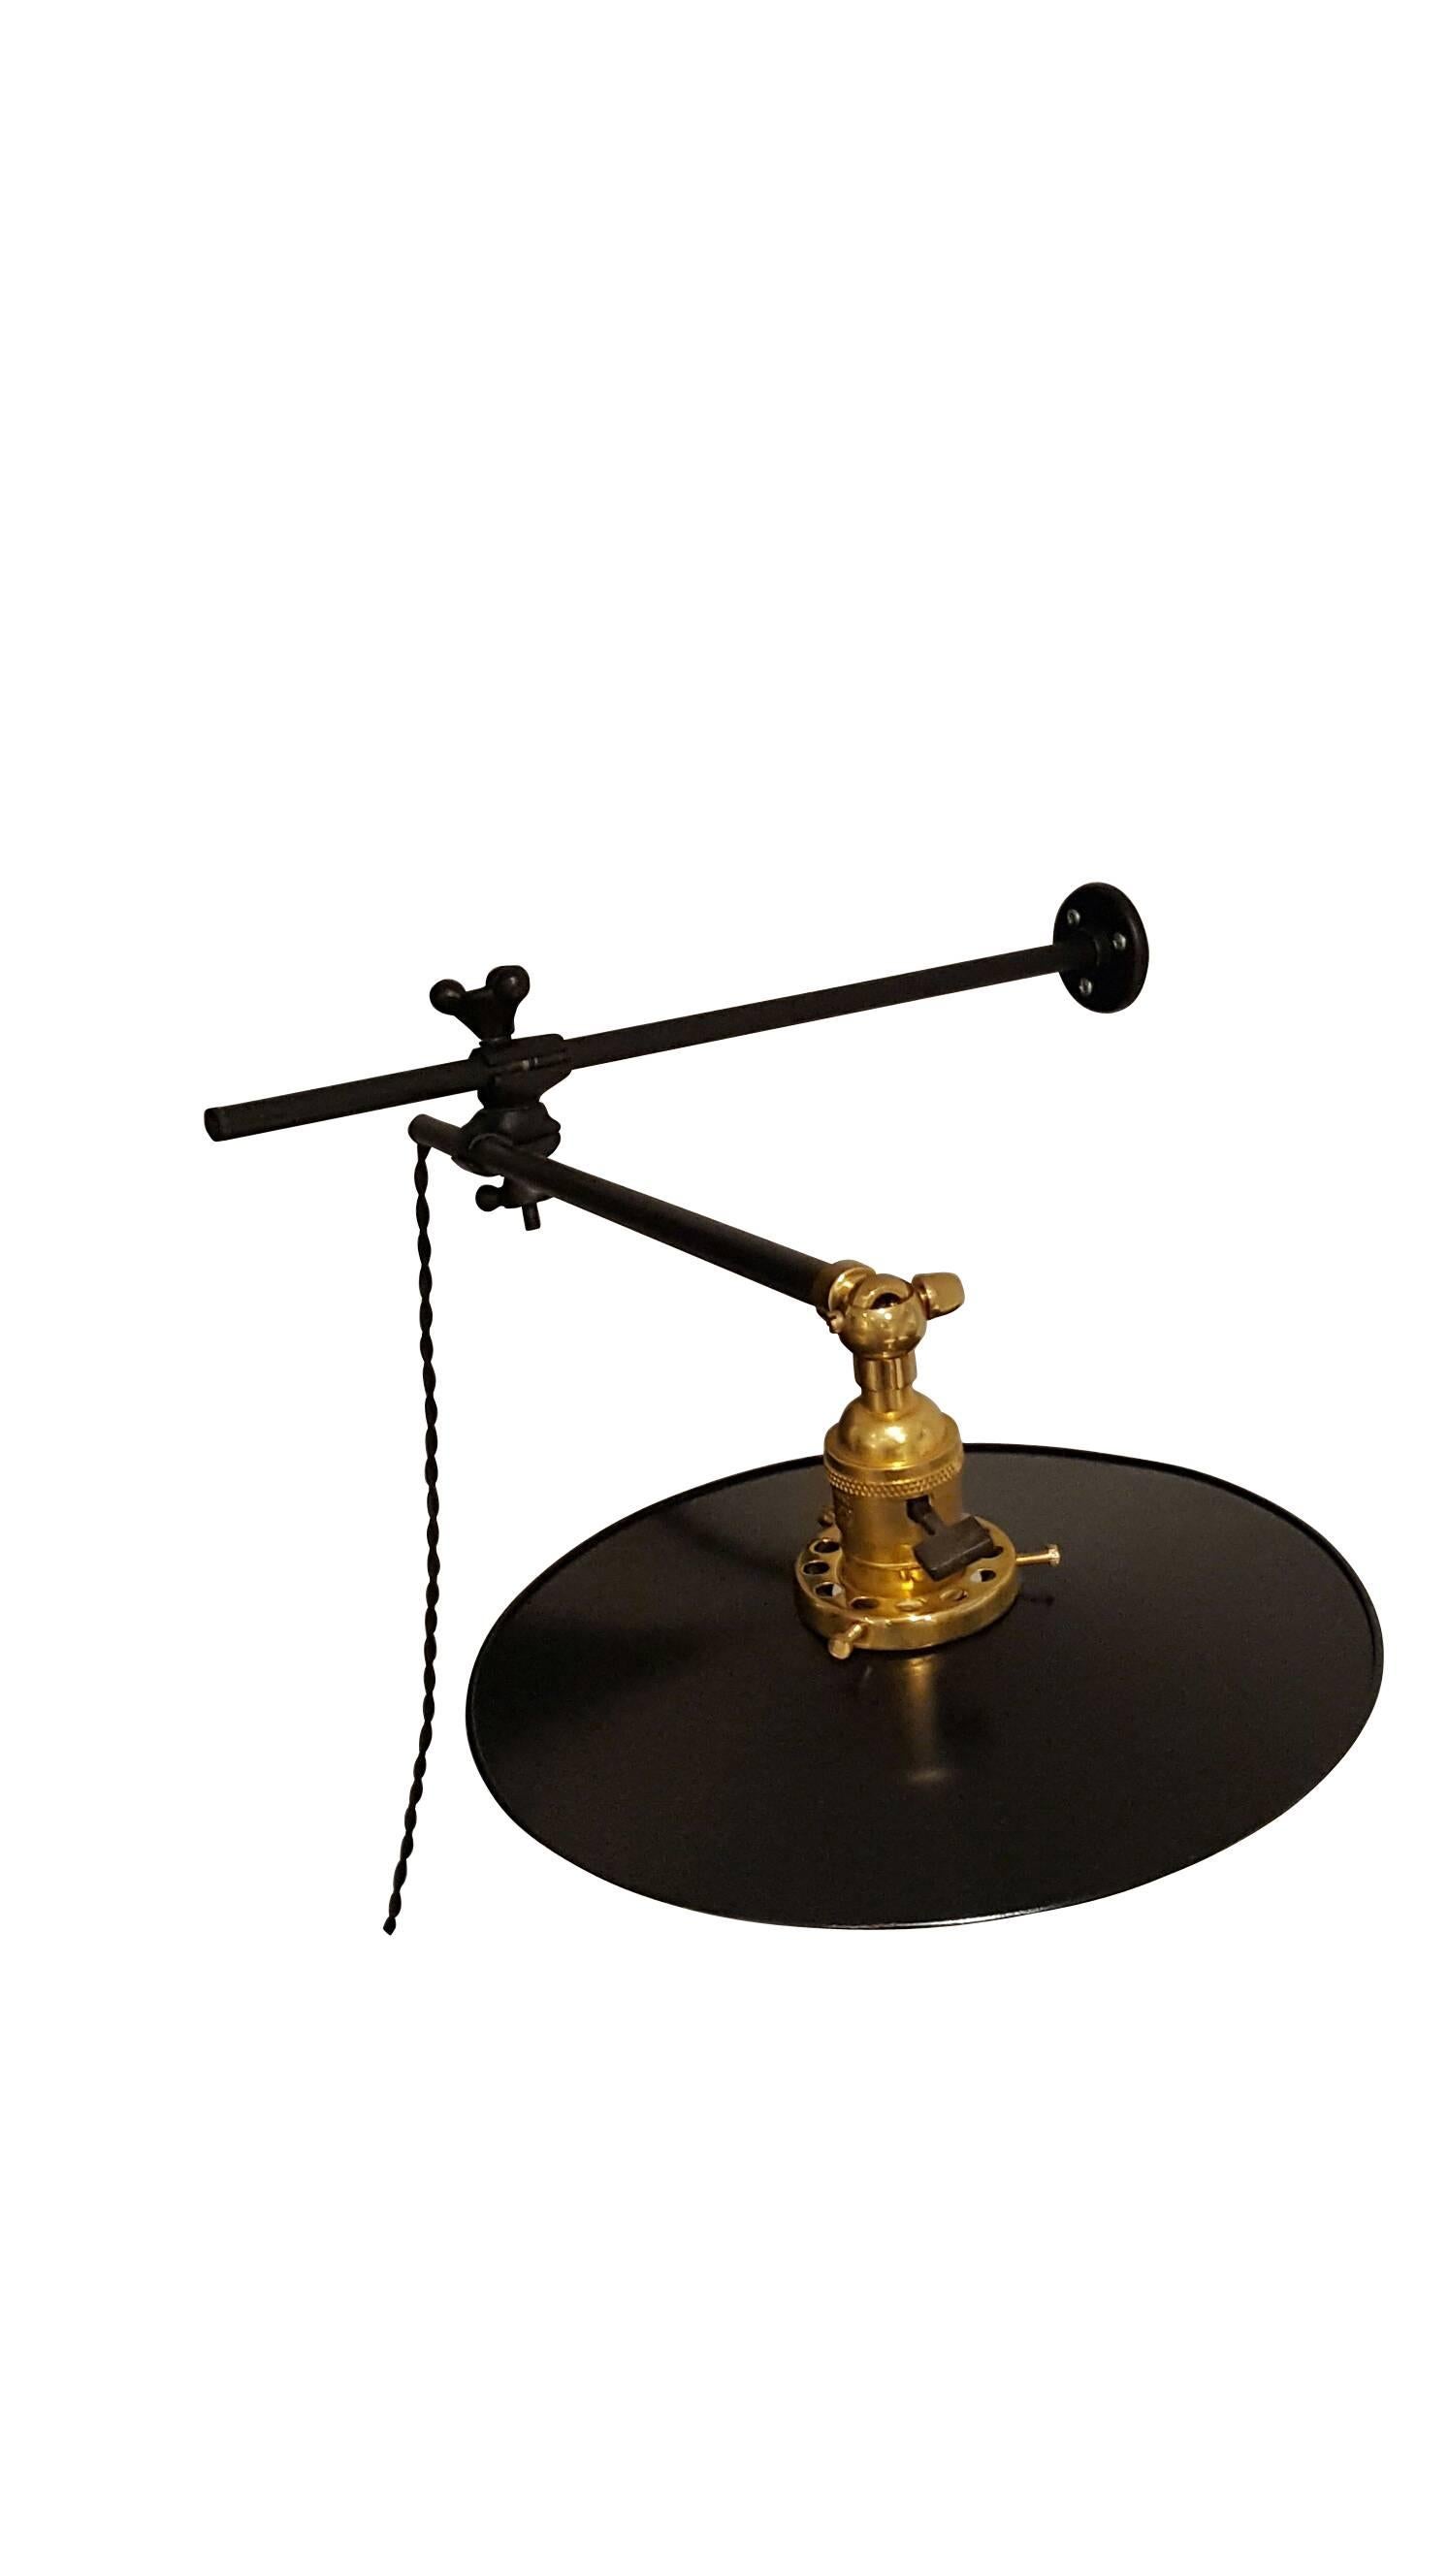 Beautiful Industrial Wall Mounted Lamp - Black
Available in two finish: Black and Cast Brass
Dimensions:
Wall Mounted arm - 18"
Articulated Arm - 24"
Fully Adjustable